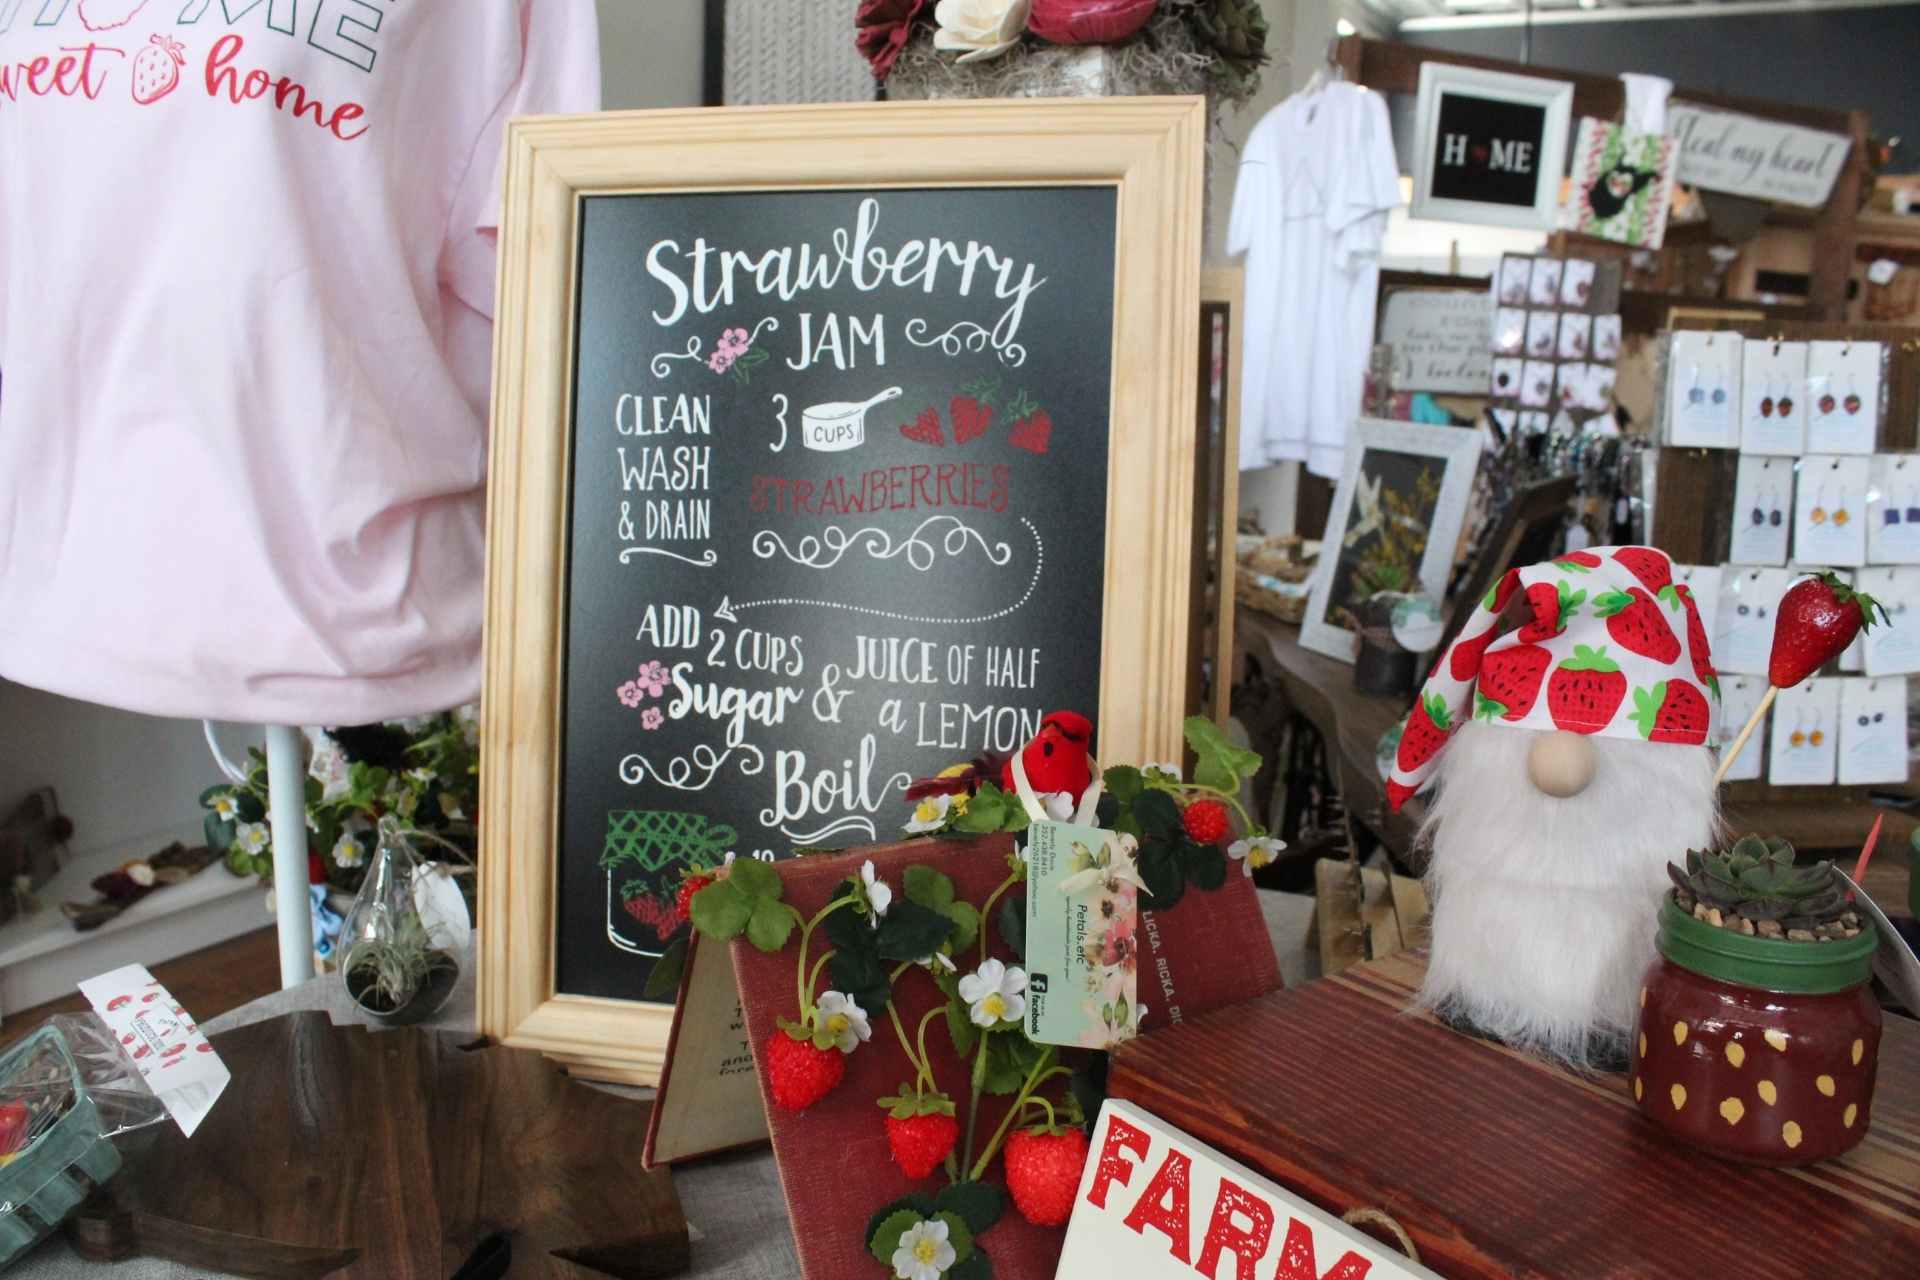 Mountain Mama Market has a variety of strawberry themed treats on sale in their North Kanawha Street location.